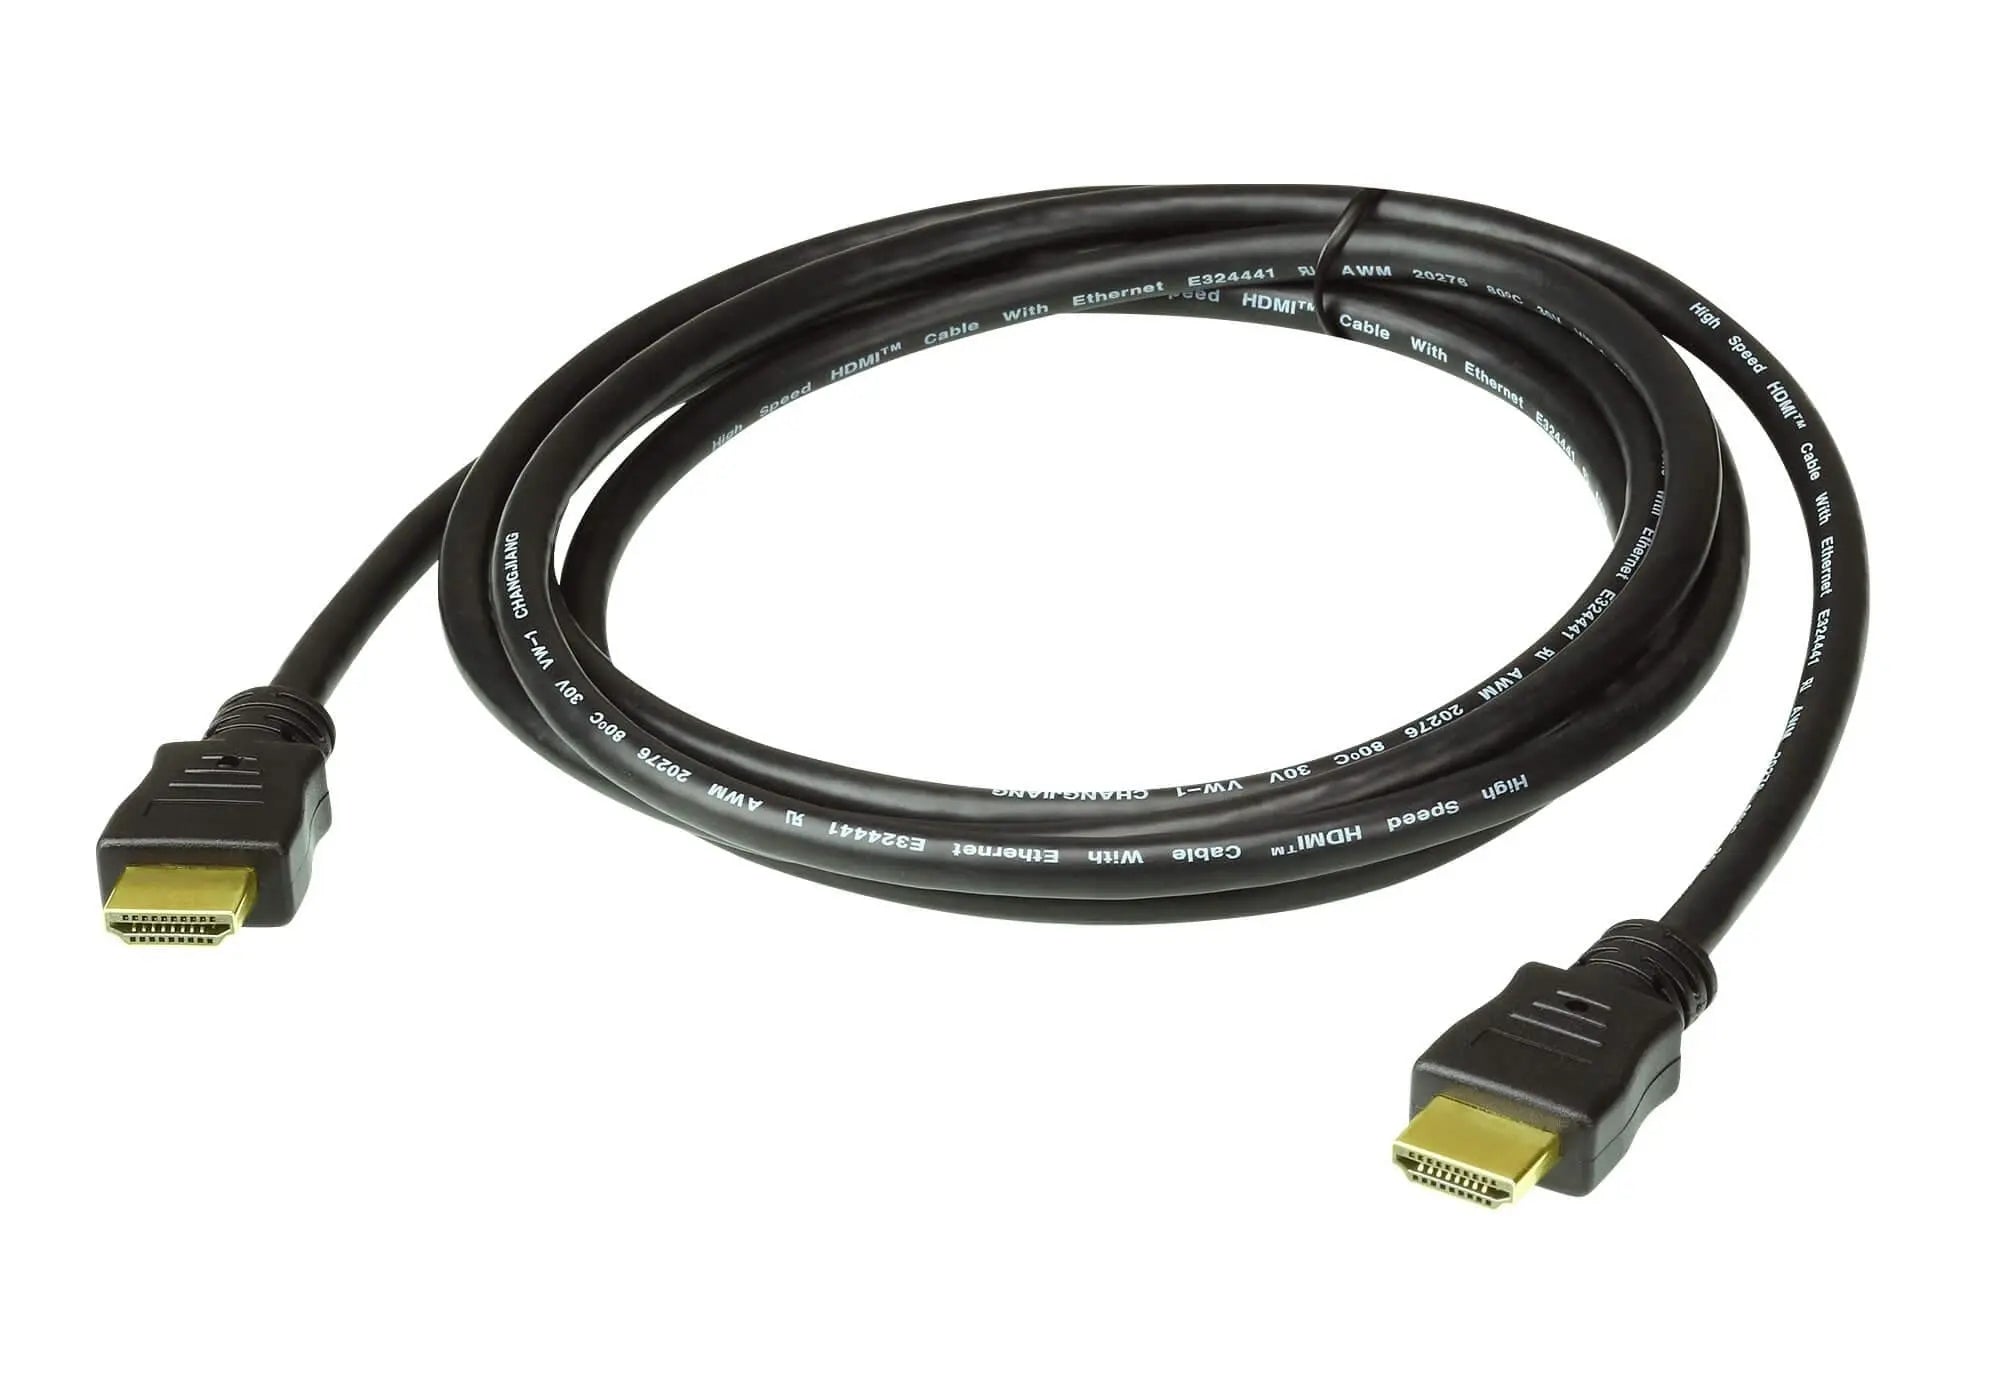 ATEN 5M High Speed HDMI Cable with Ethernet. Support 4K UHD DCI, up to 4096 x 2160 @ 30Hz ATEN